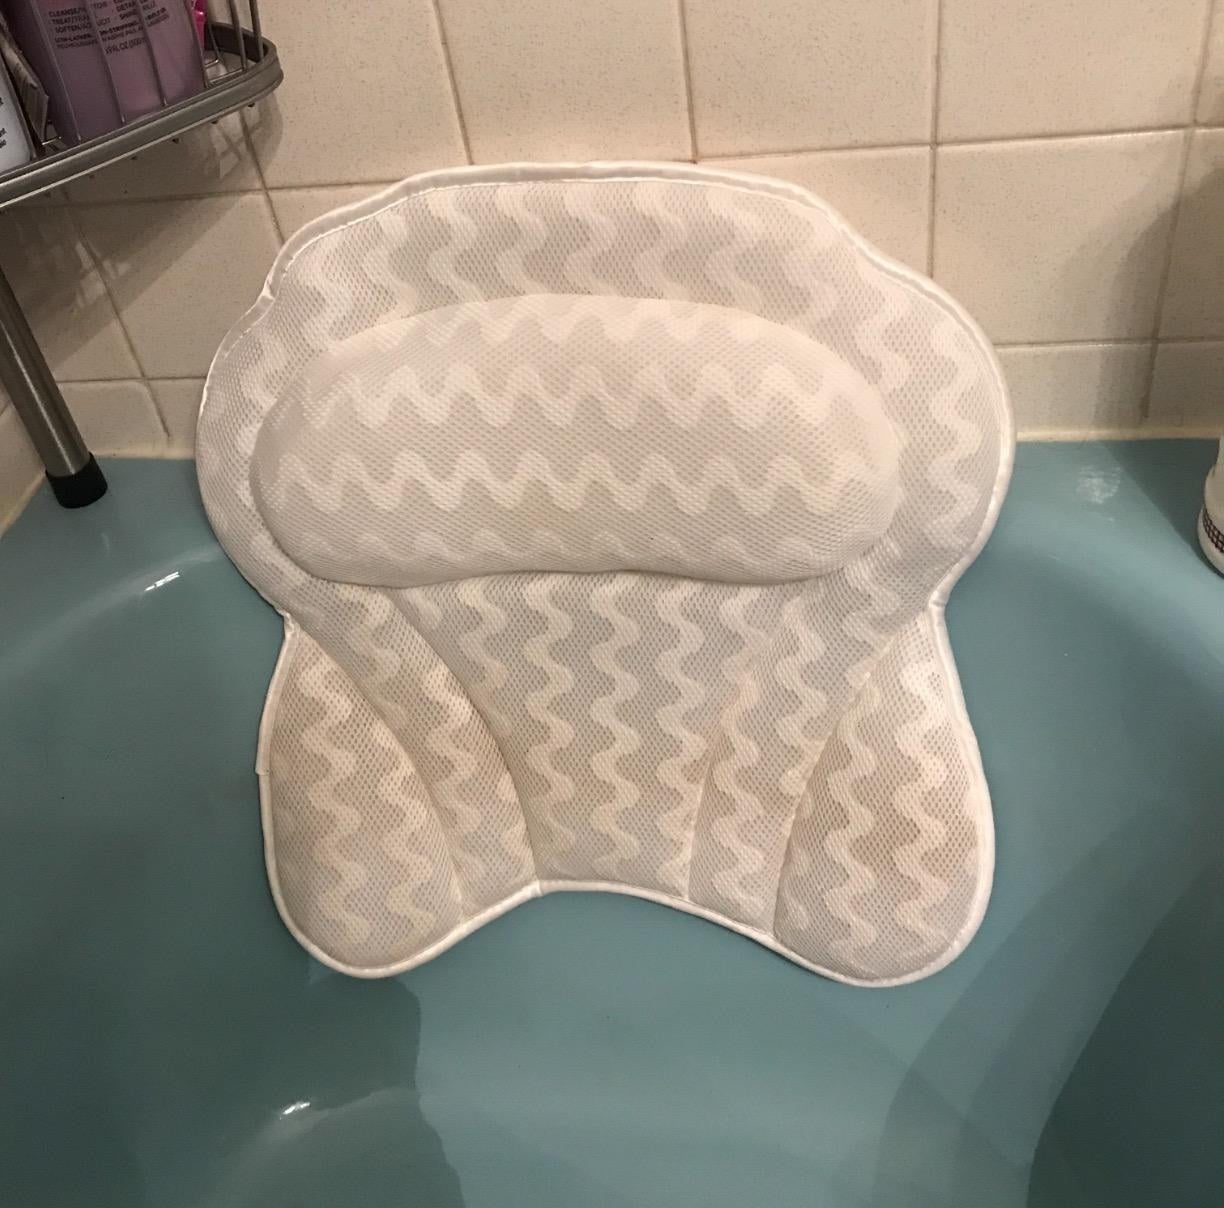 The pillow suctioned to a blue tub